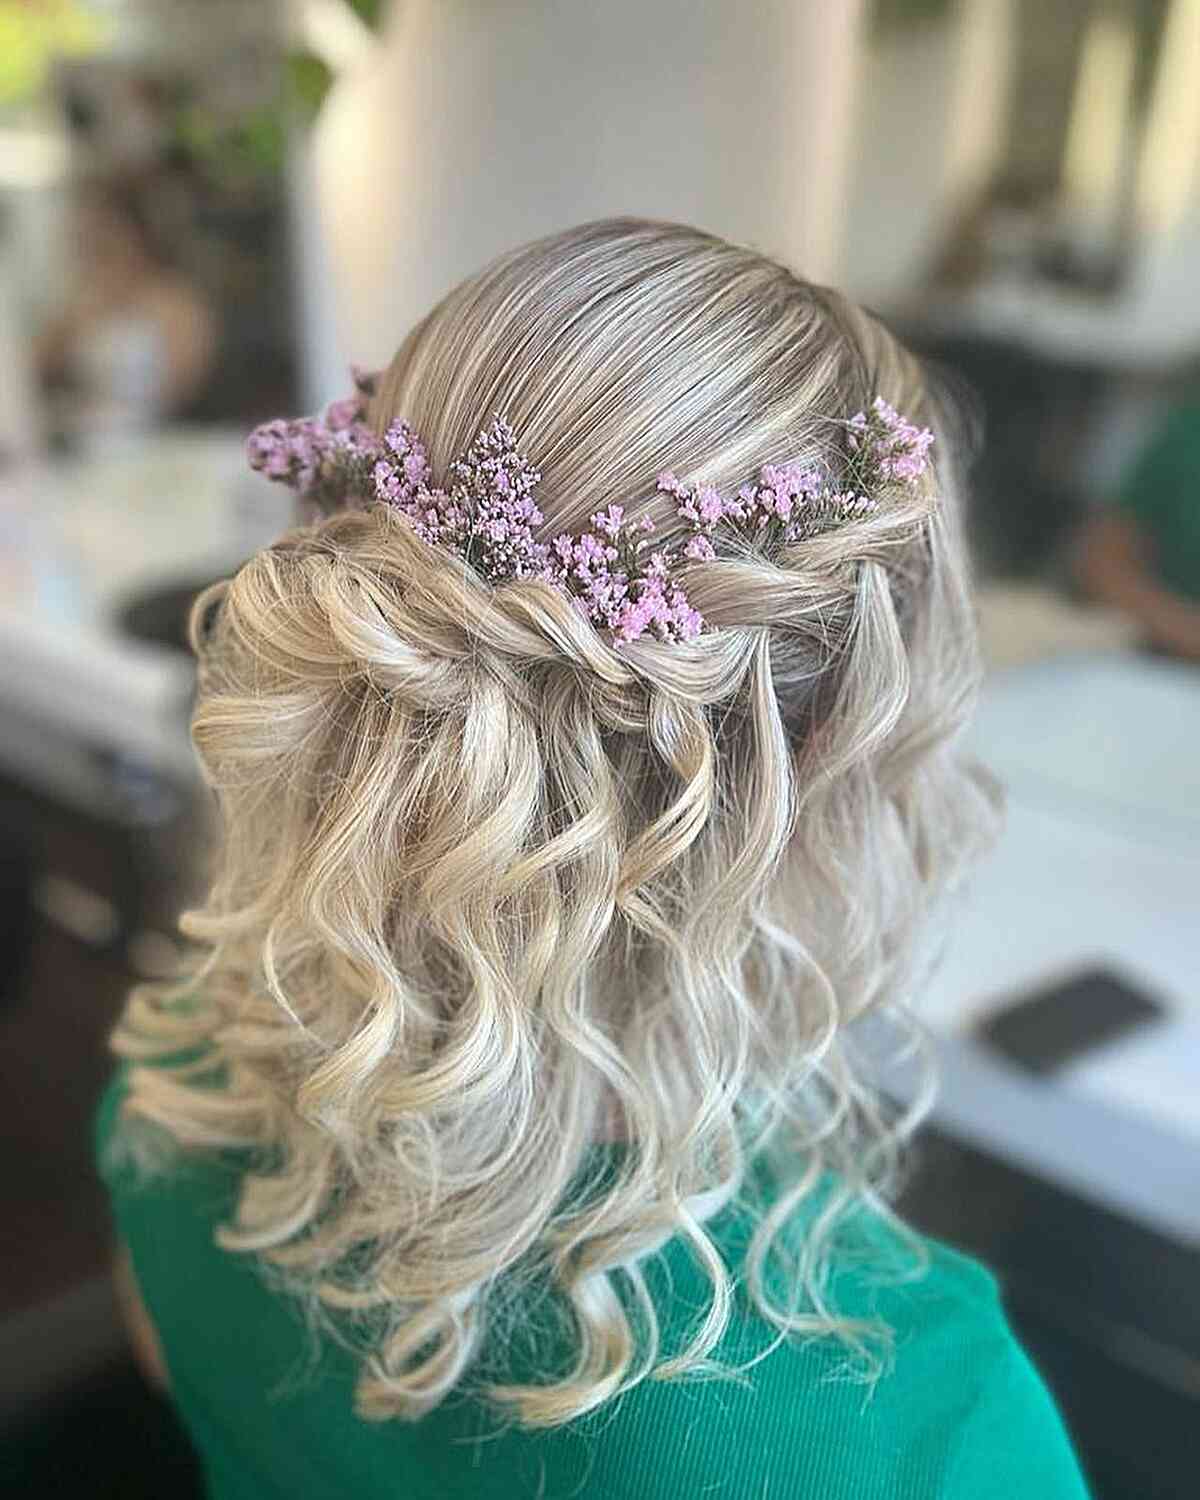 Curled Mid-Length Hair with Flowers for Festivals and Events